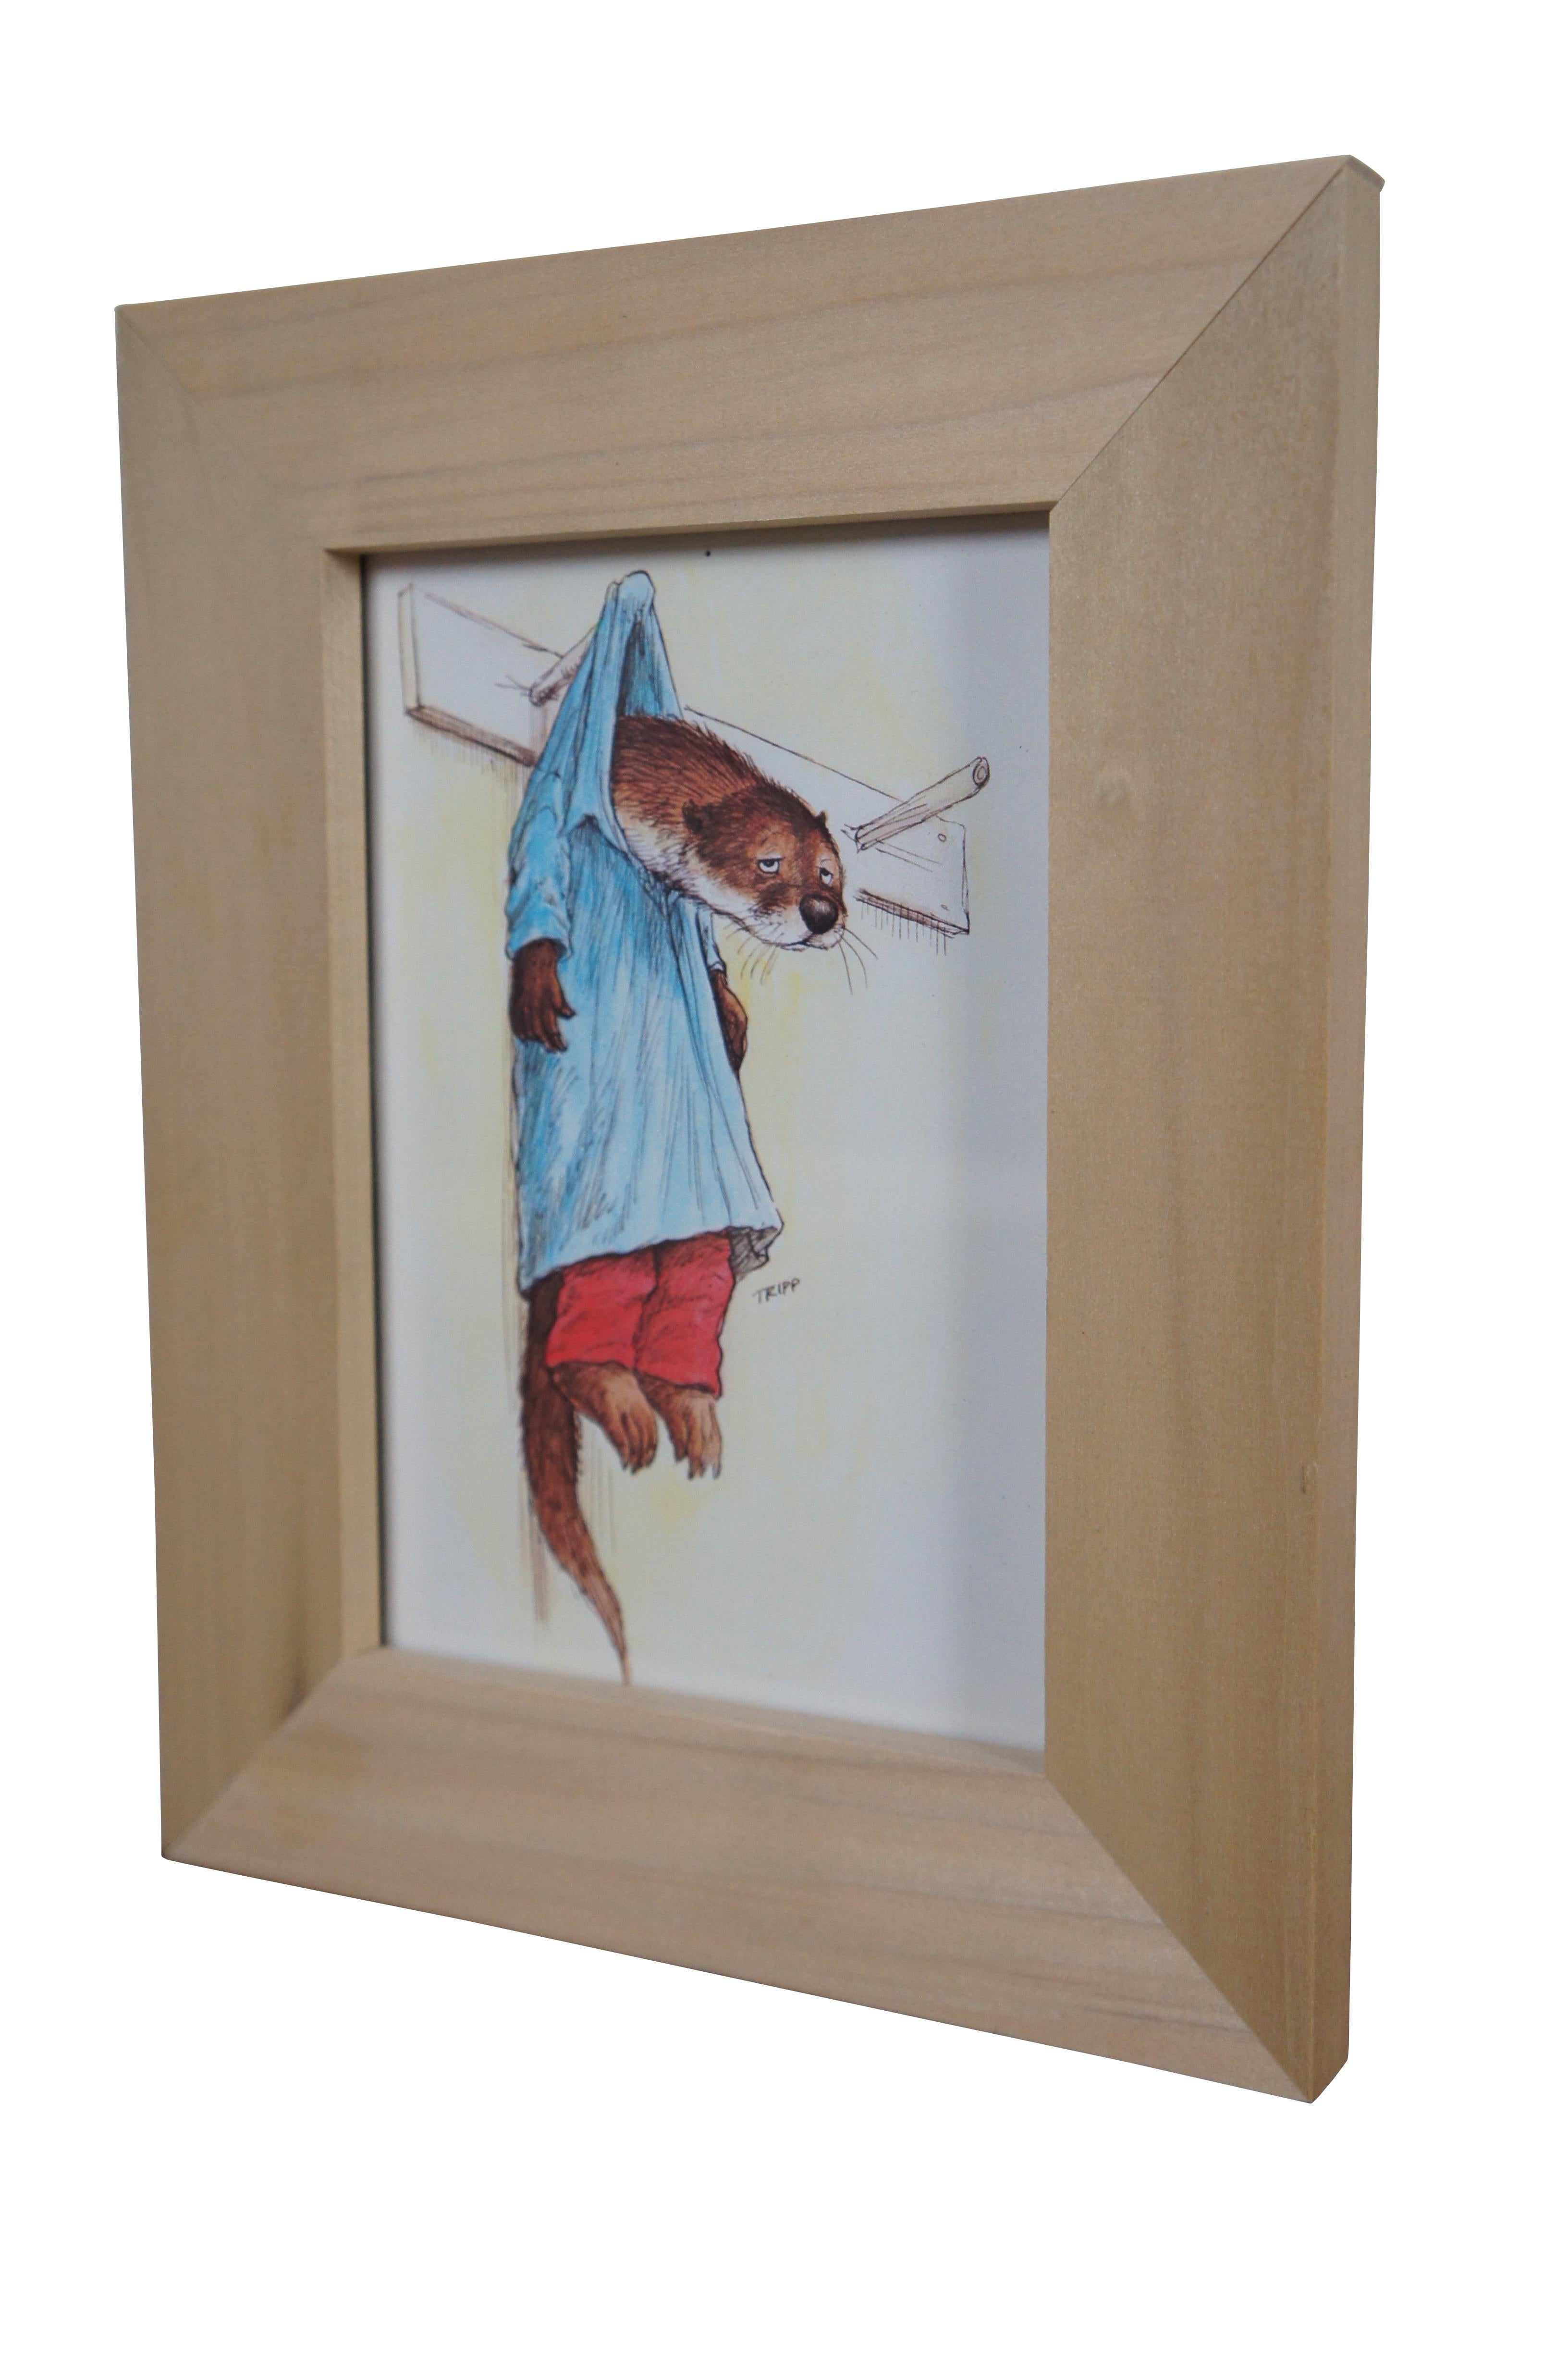 Vintage Wallace Tripp framed greeting card print featuring an Otter hanging out to dry on a coat rack peg.

Wallace Whitney Tripp was an American illustrator, anthologist and author. He was known for creating anthropomorphic animal characters of